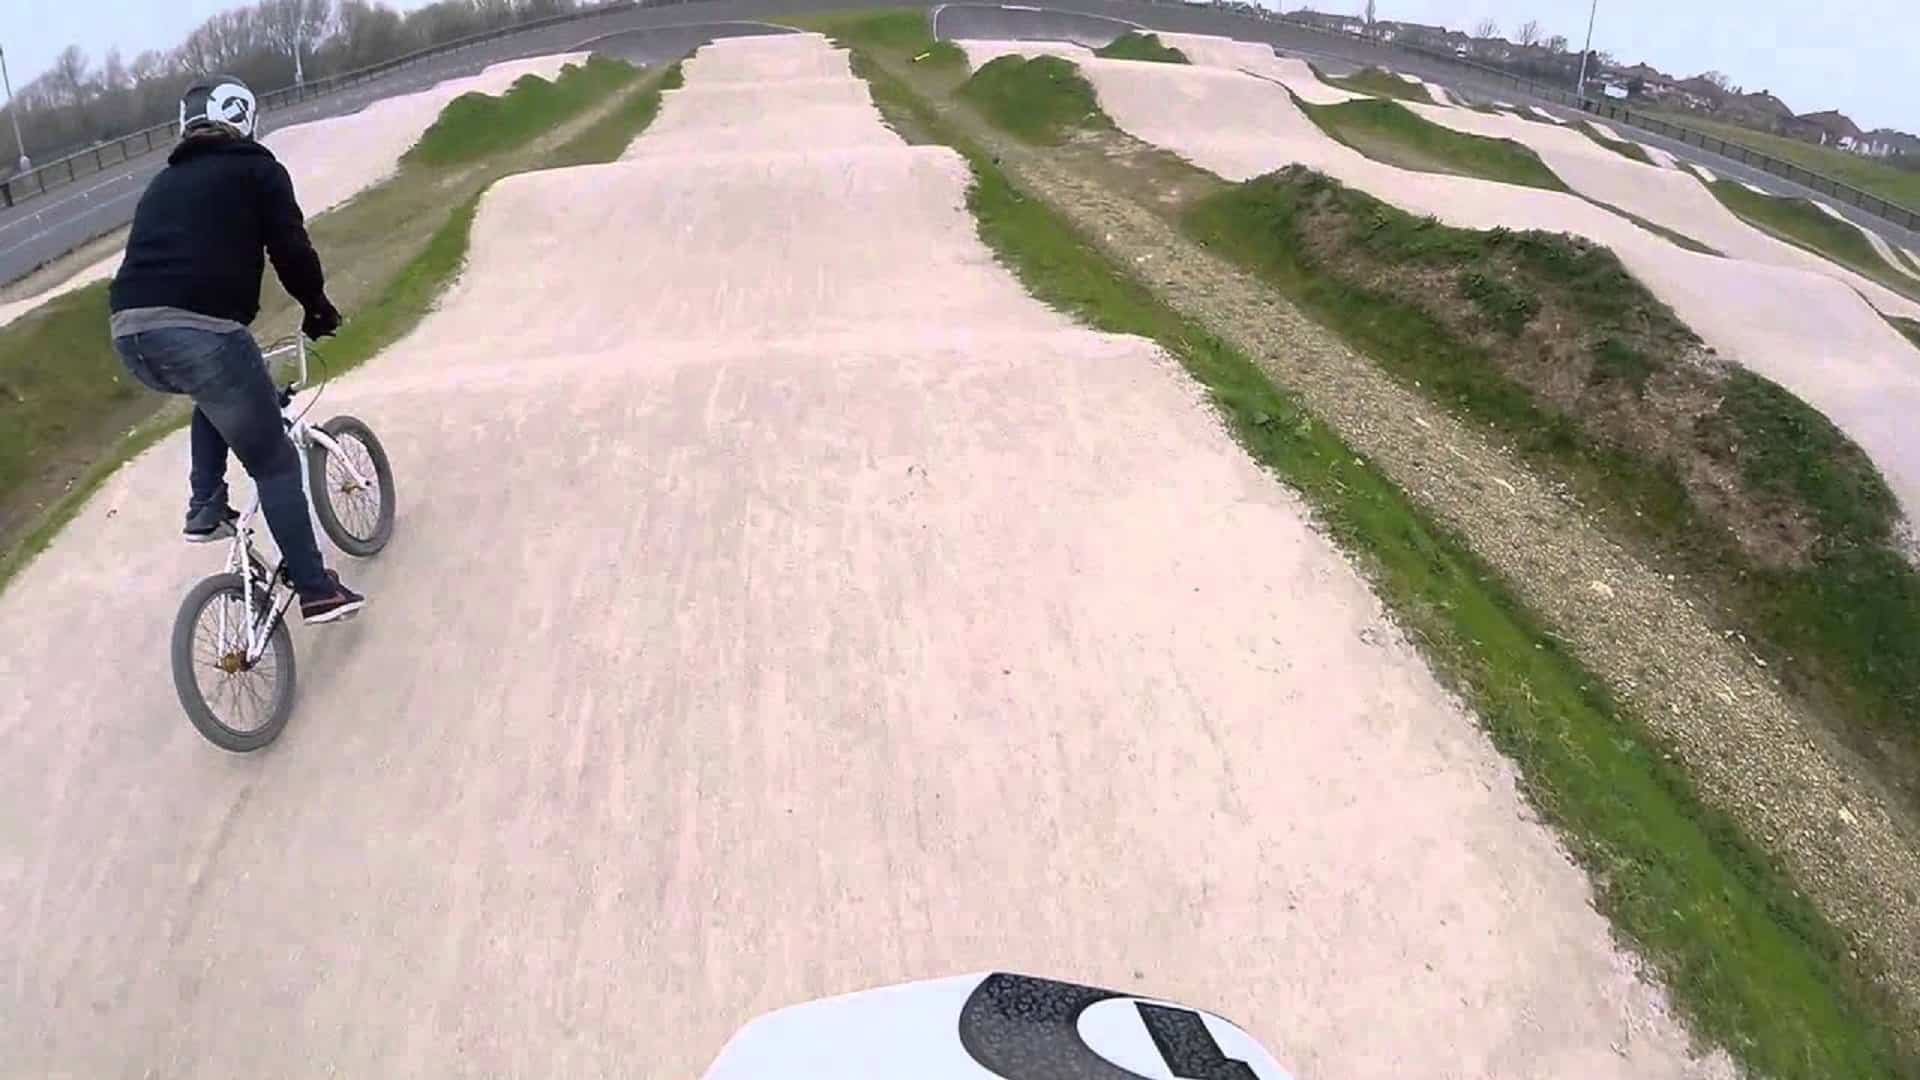 Knowsley Bmx Track in UK